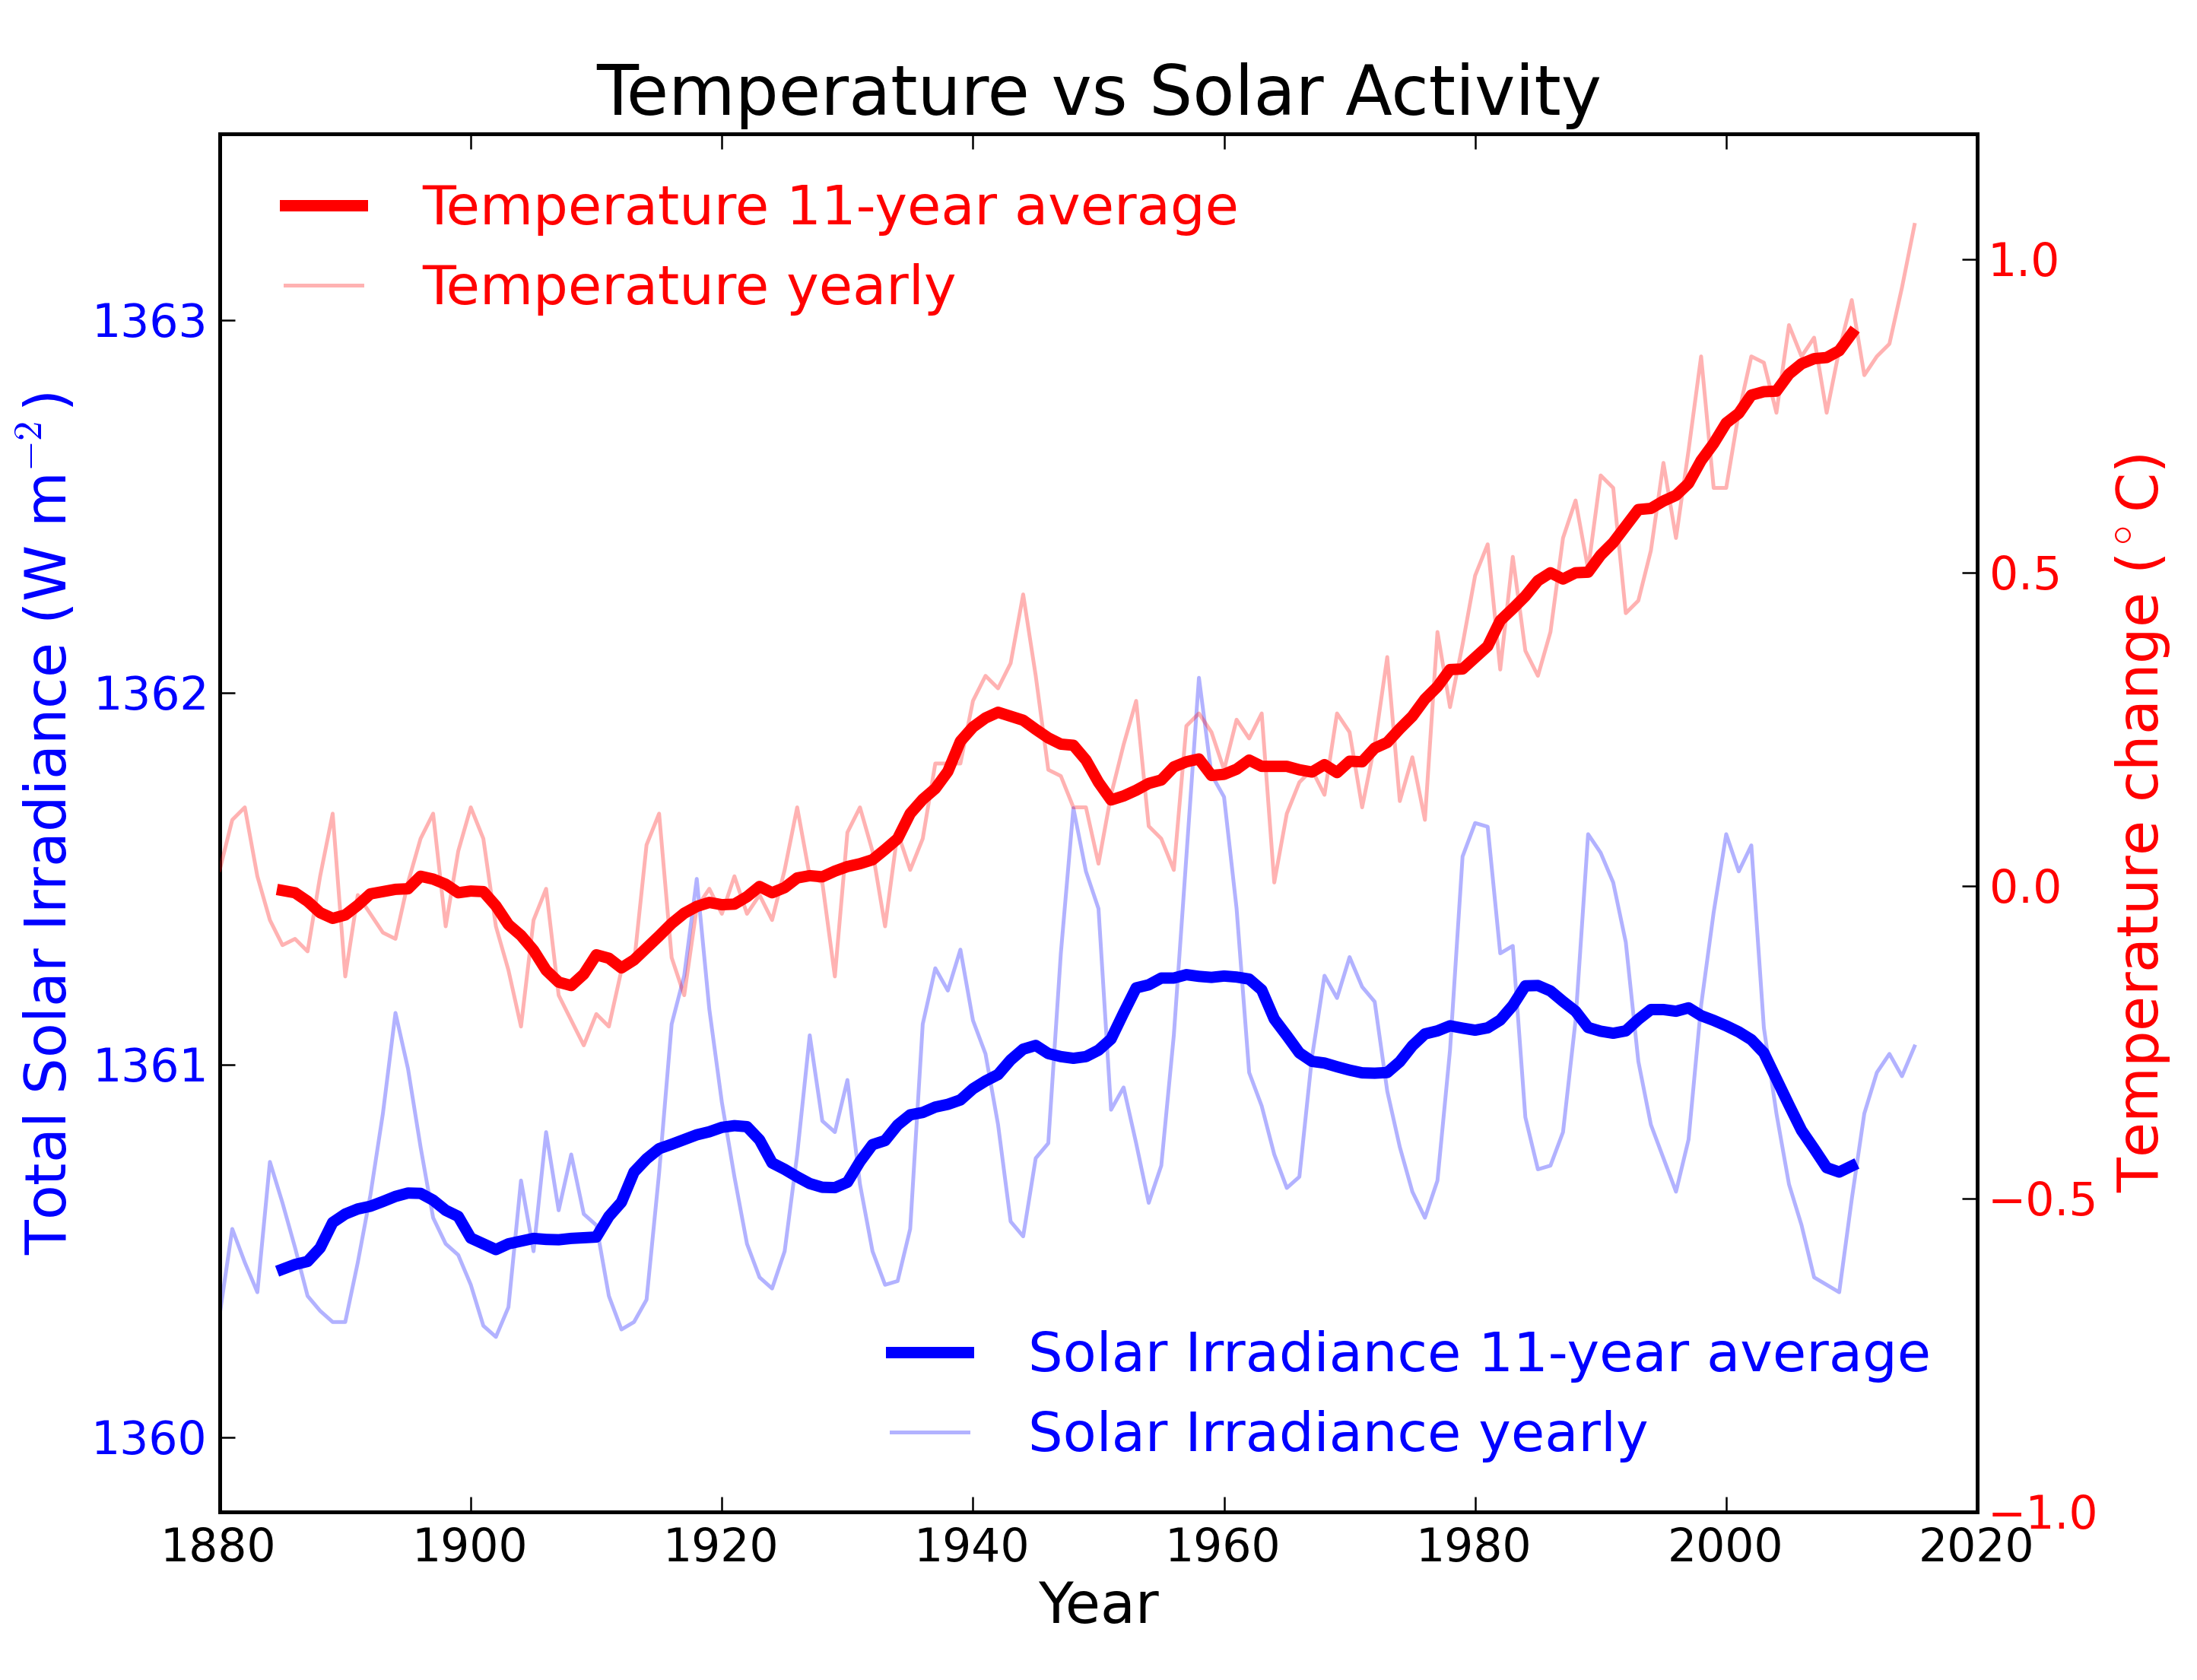 Solar irradiance and temperature